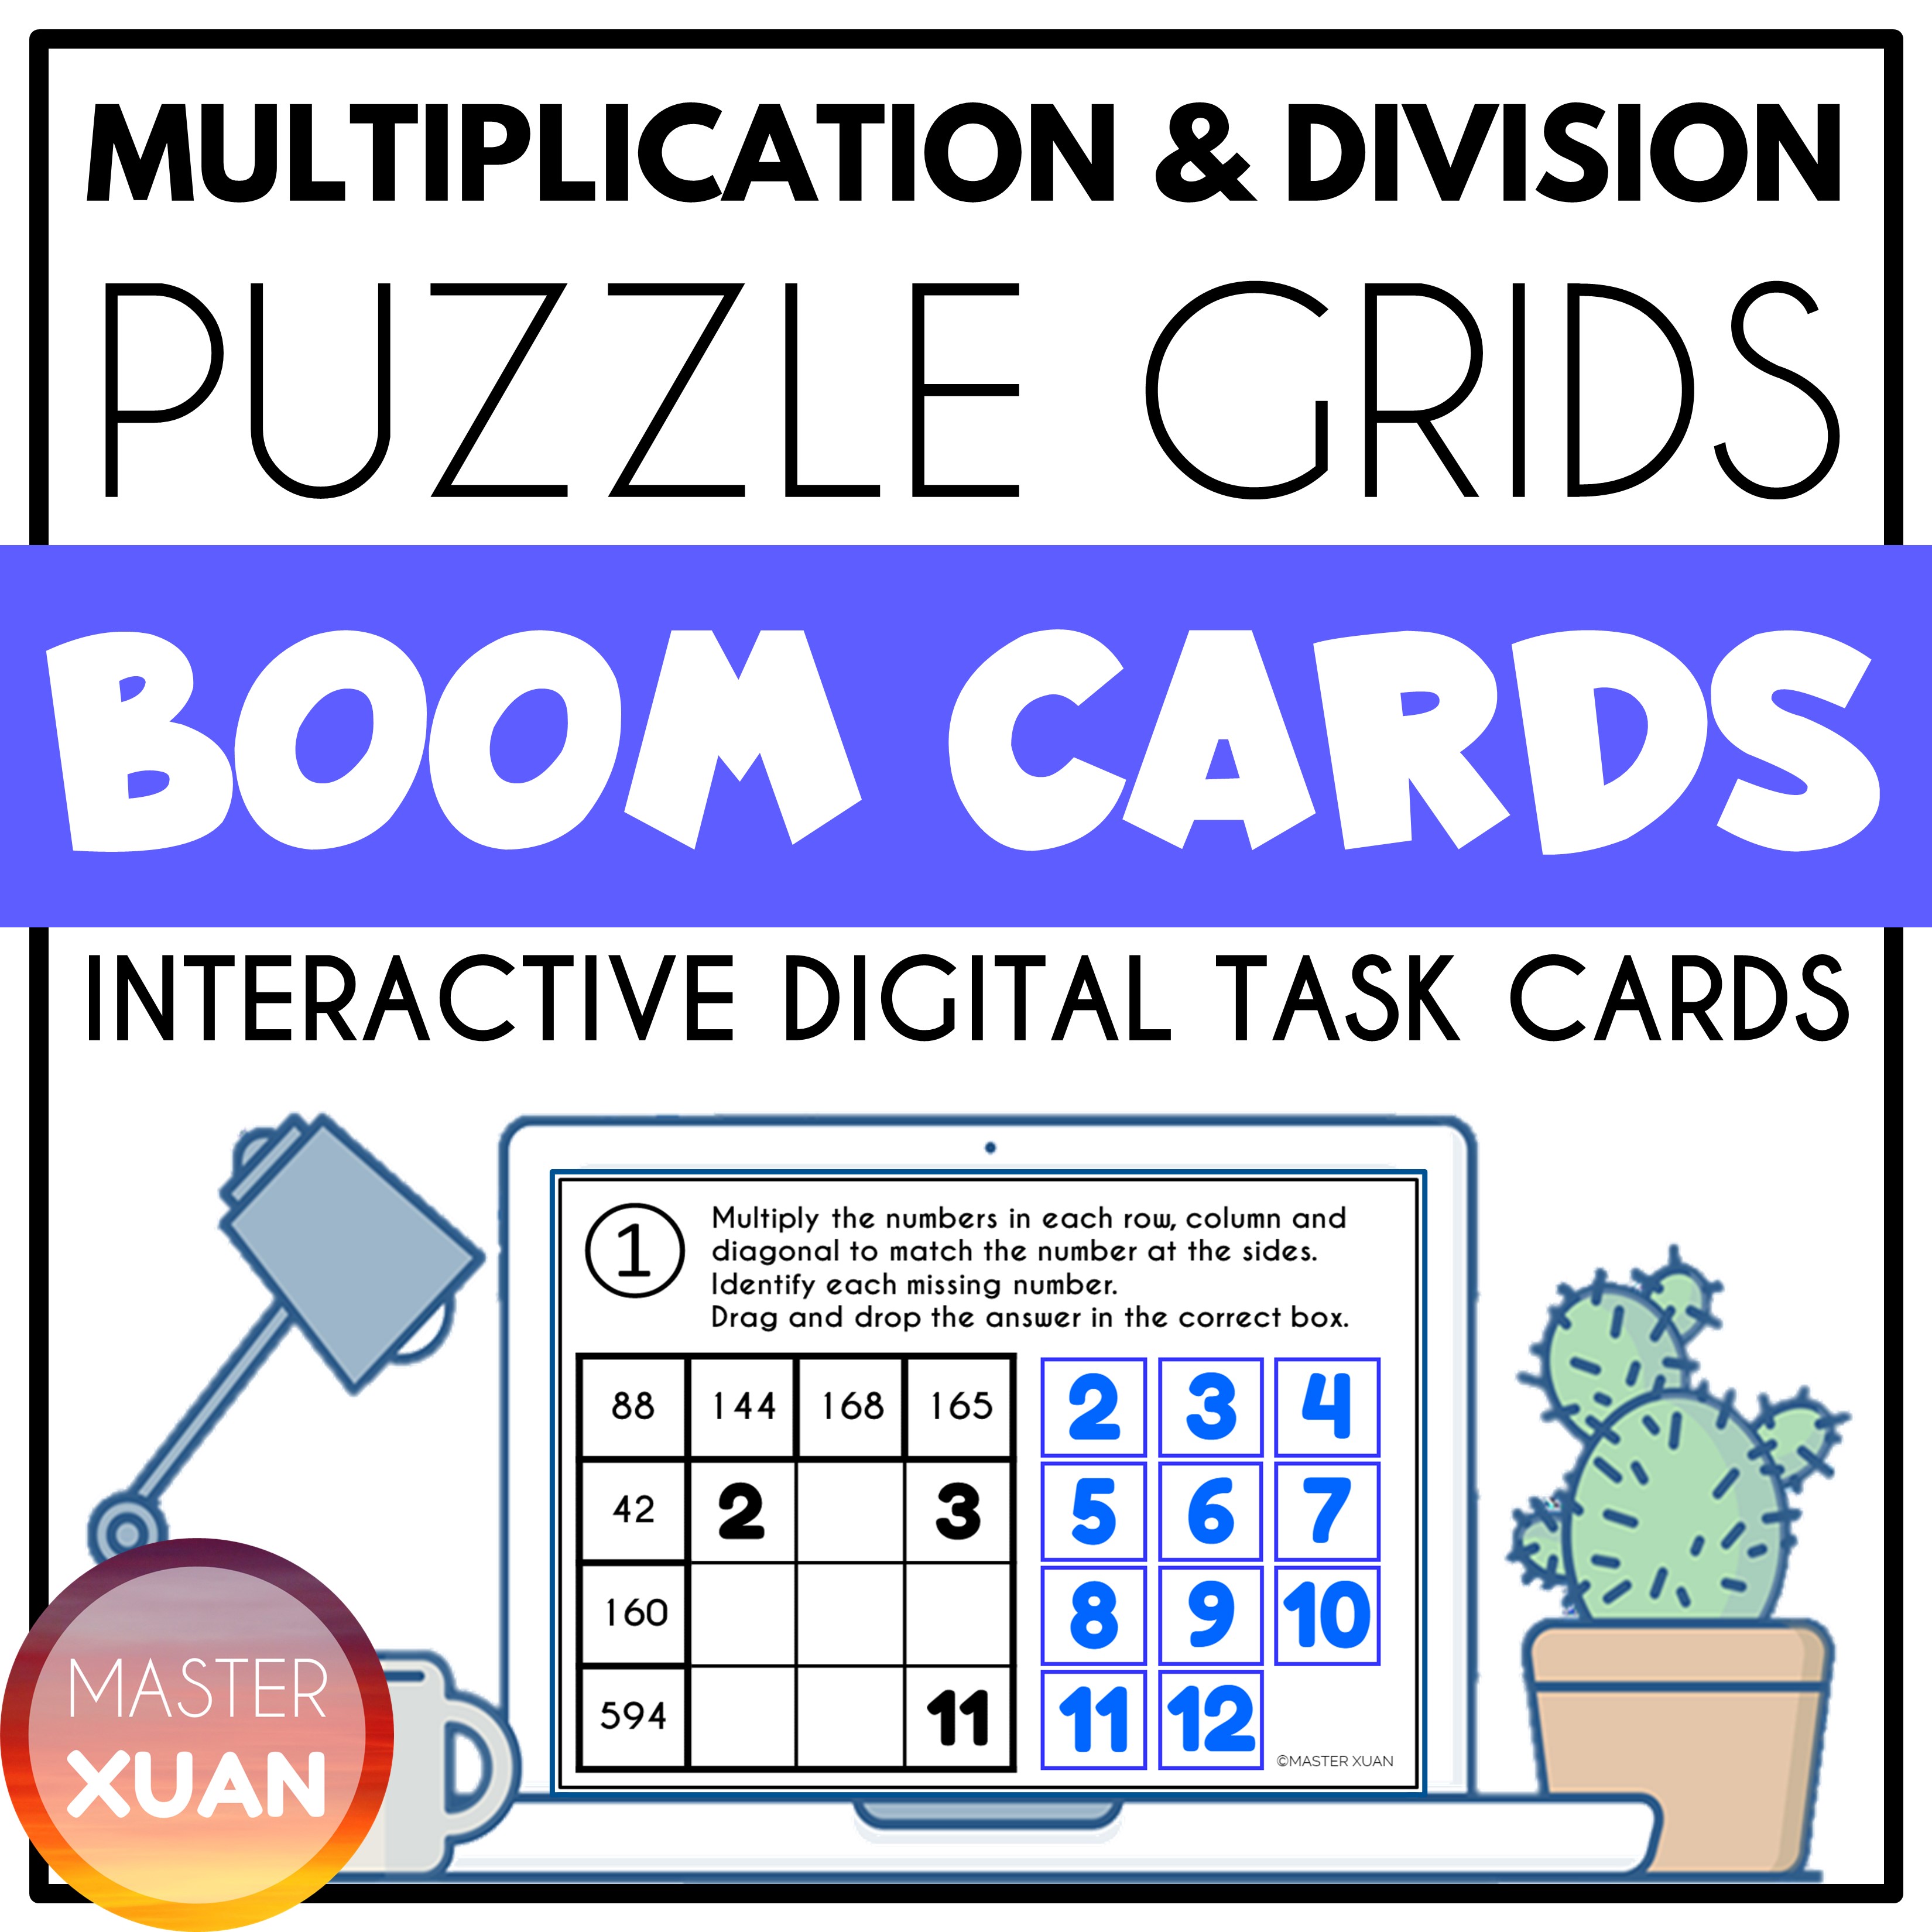 multiplication and division puzzles worksheet cover shows puzzle grids